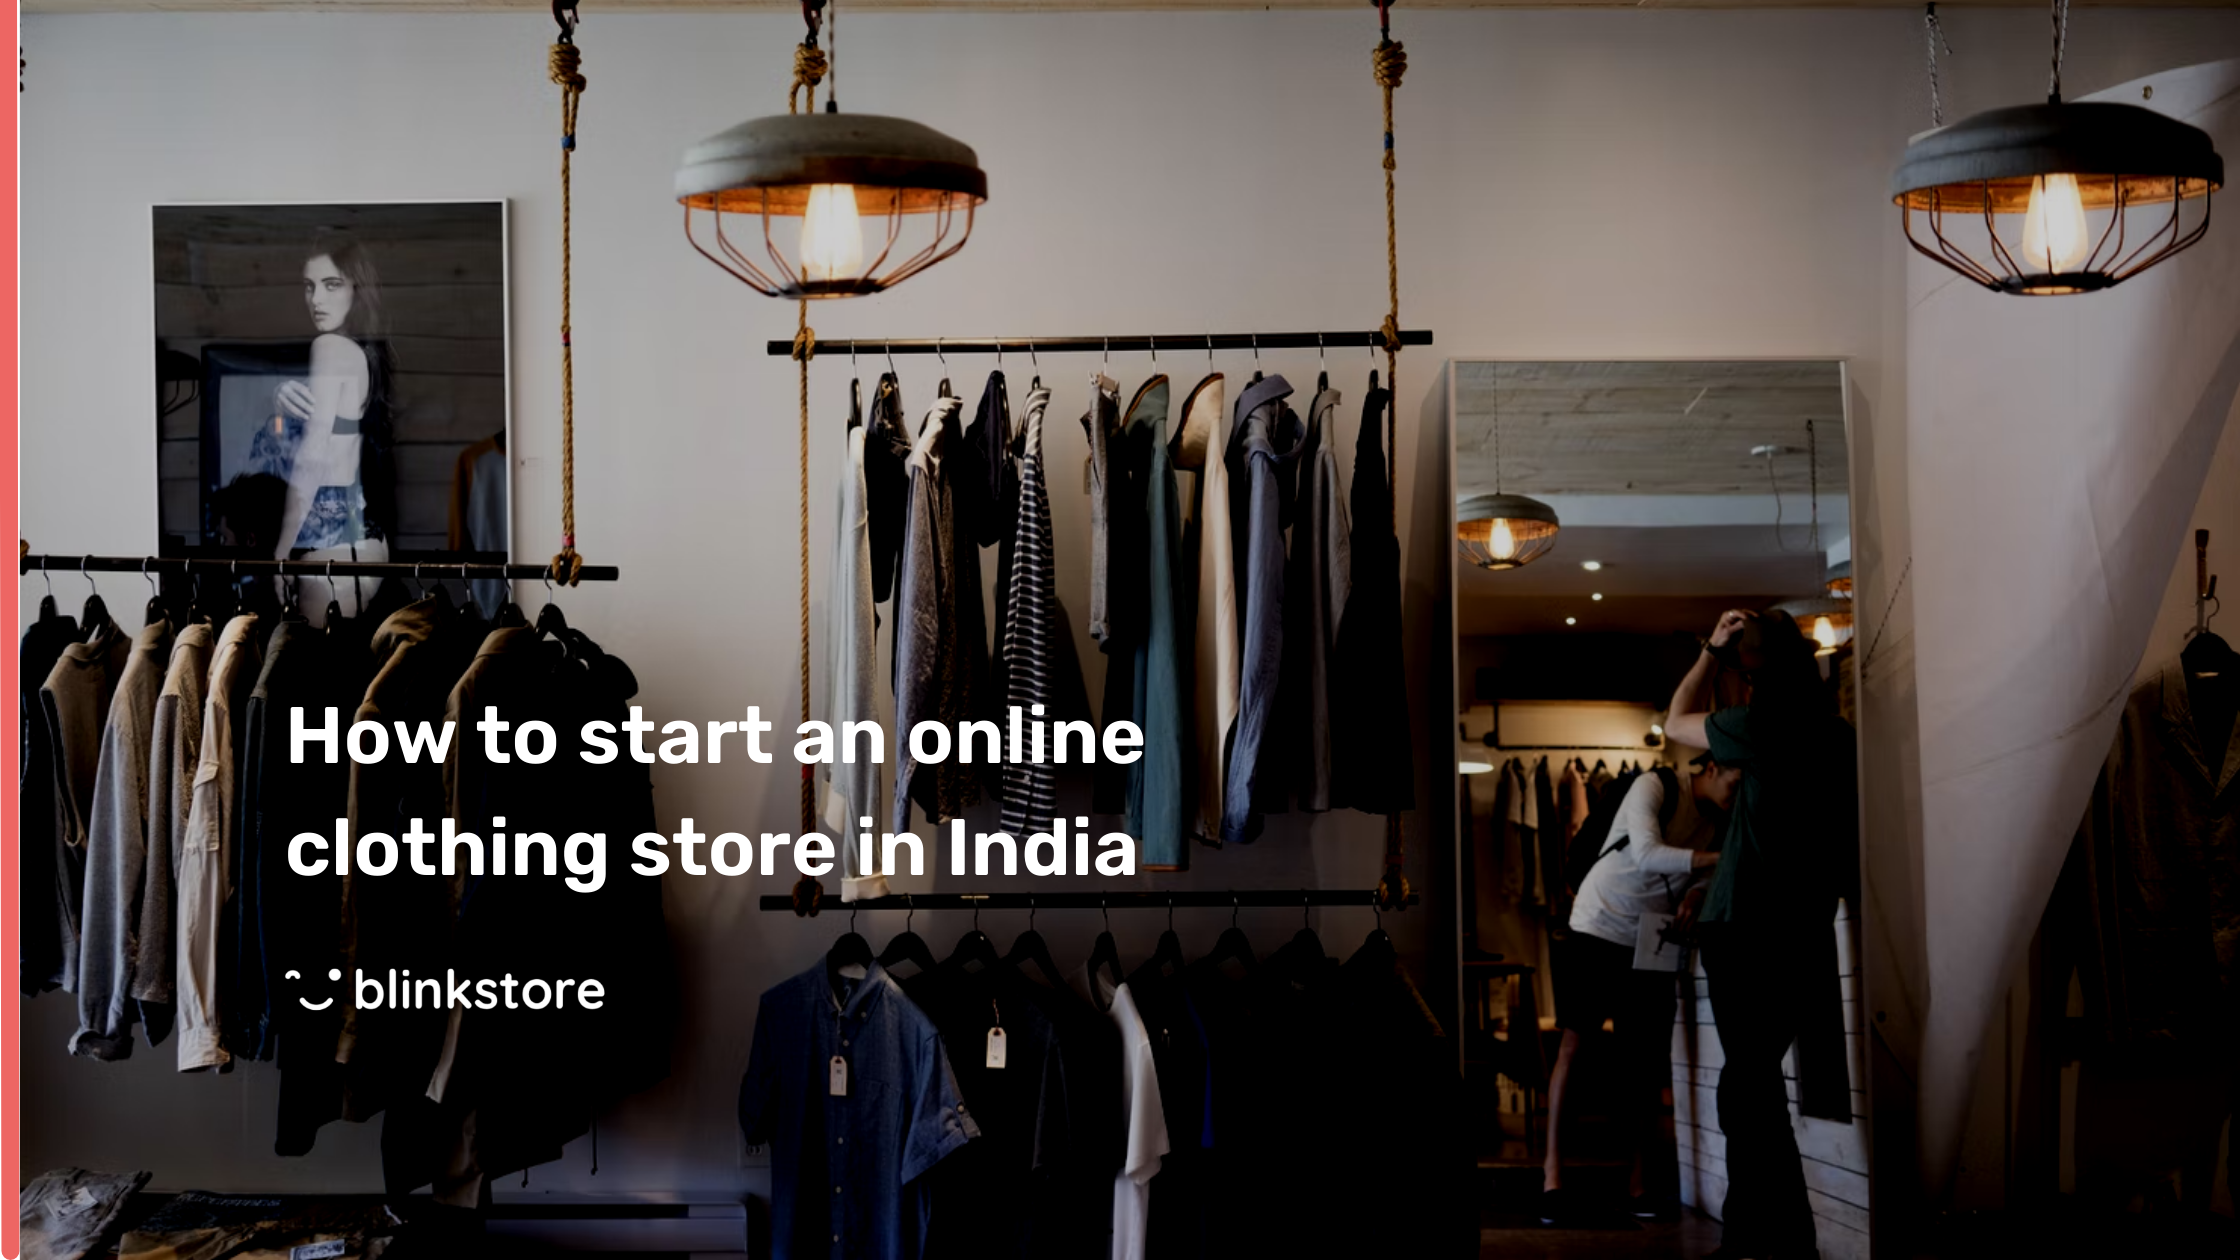 How To Start an Online Clothing Store With No Money in India – 4 Simple Steps